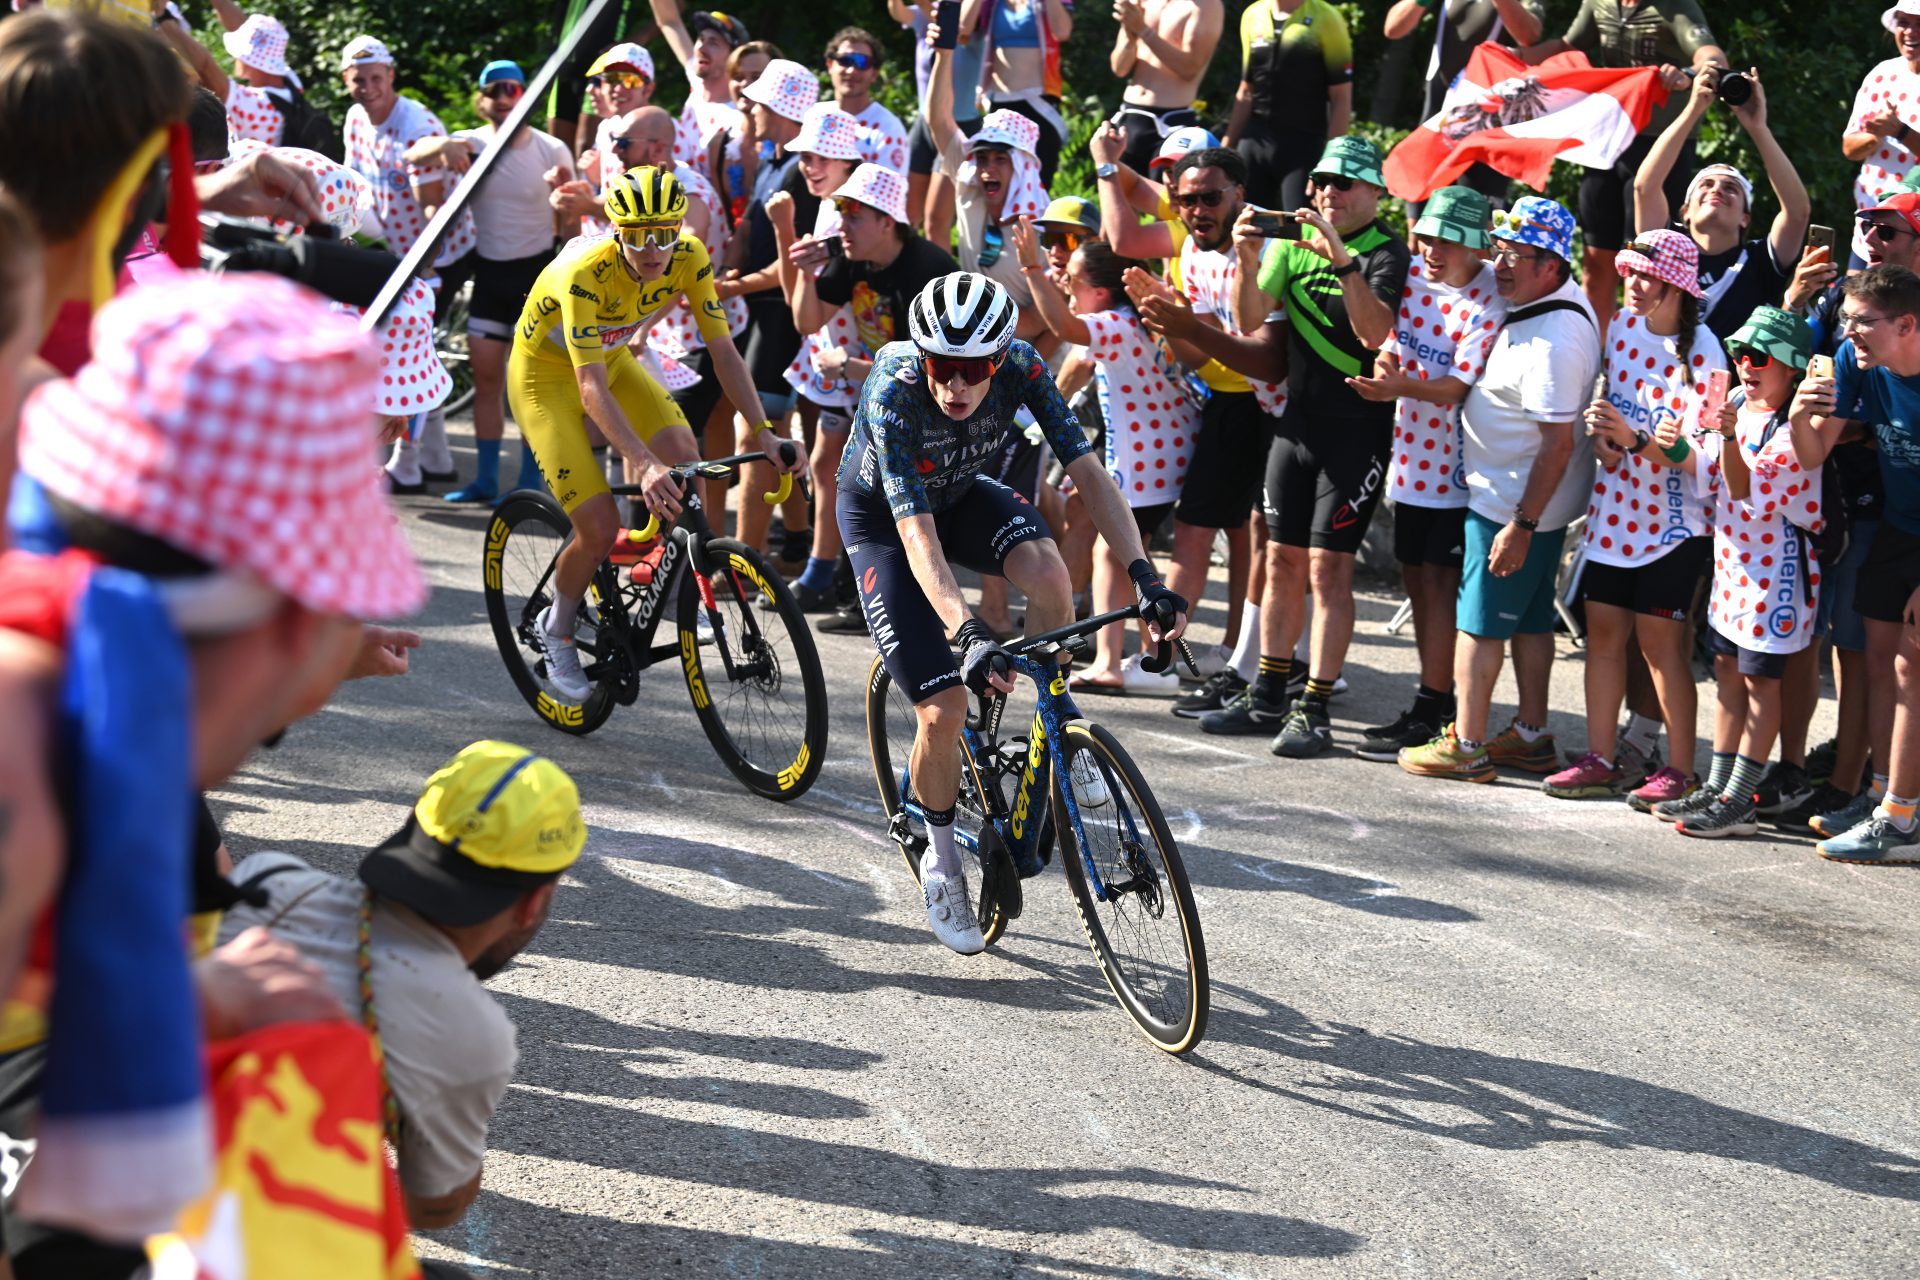 The major problem of the Tour de France that's only getting worse and worse